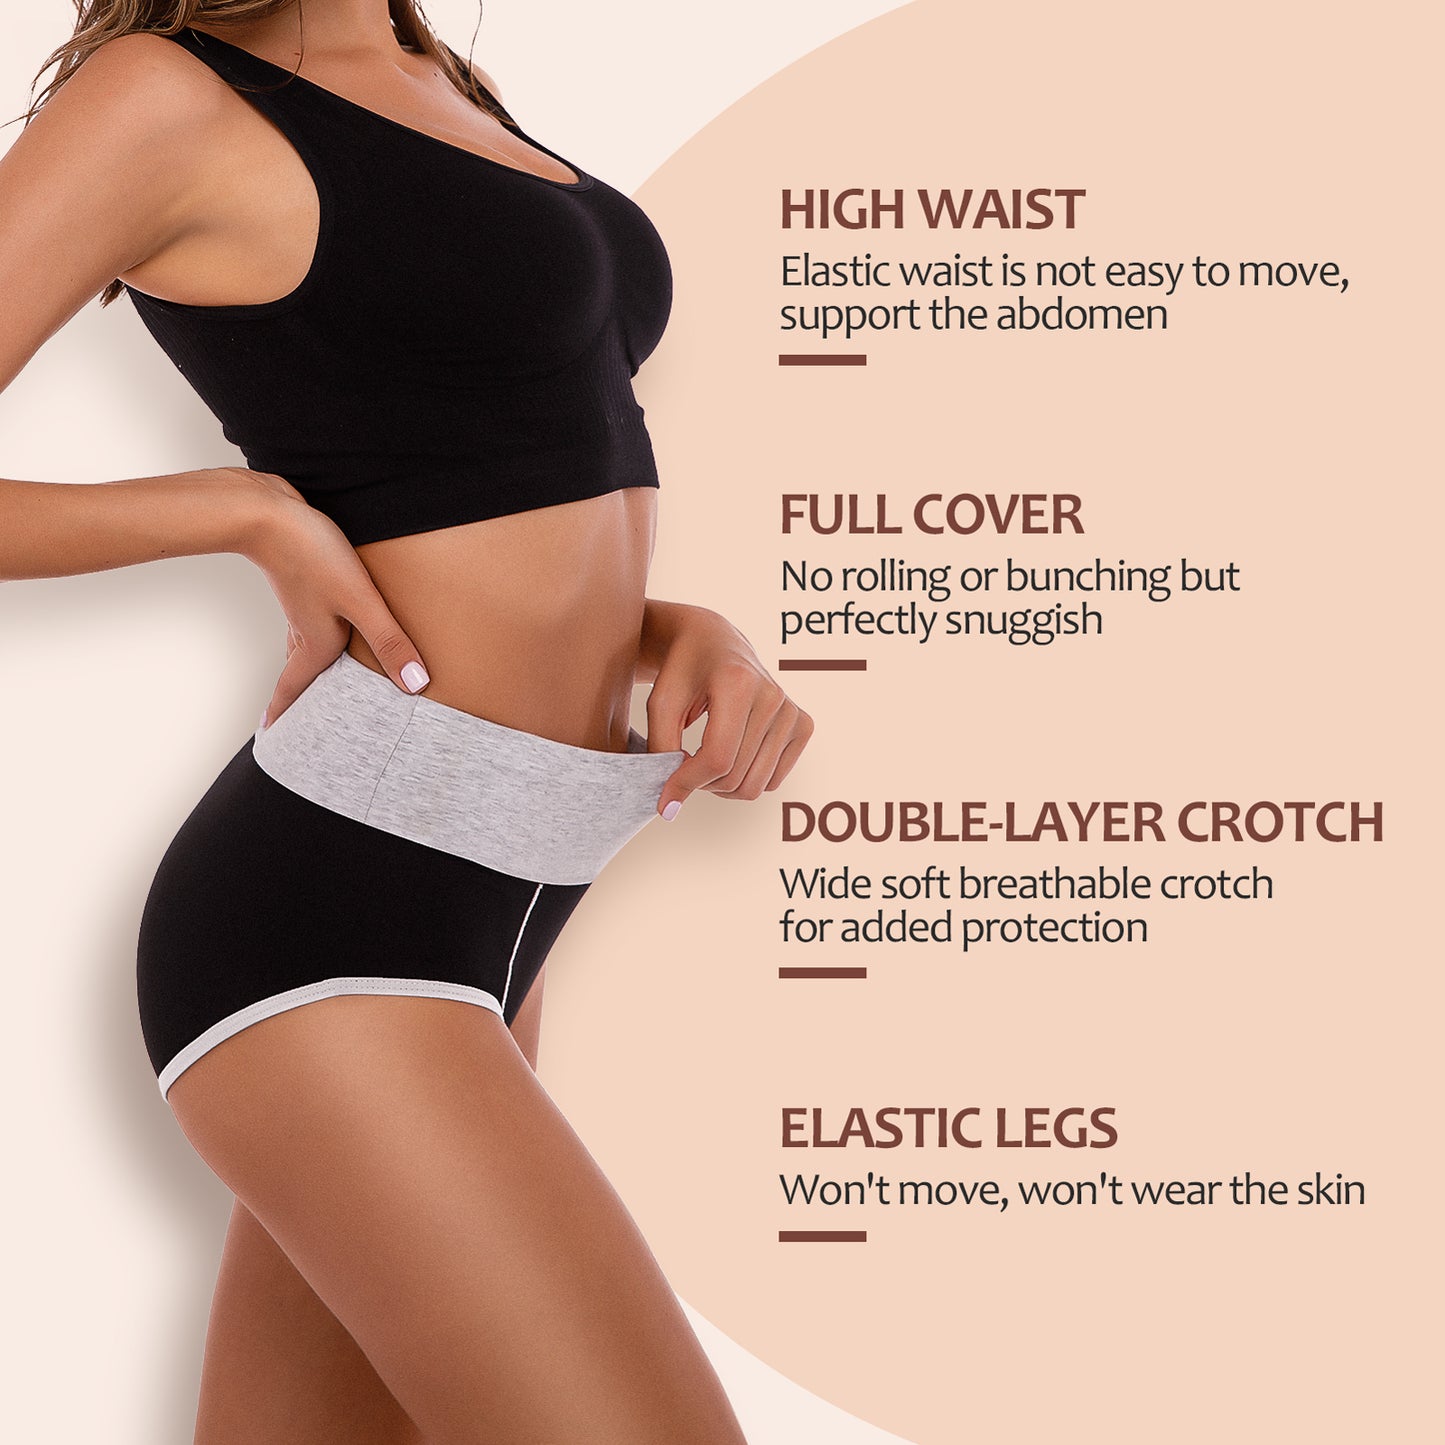 Sinopant High Waisted Cotton Underwear For Women Knickers